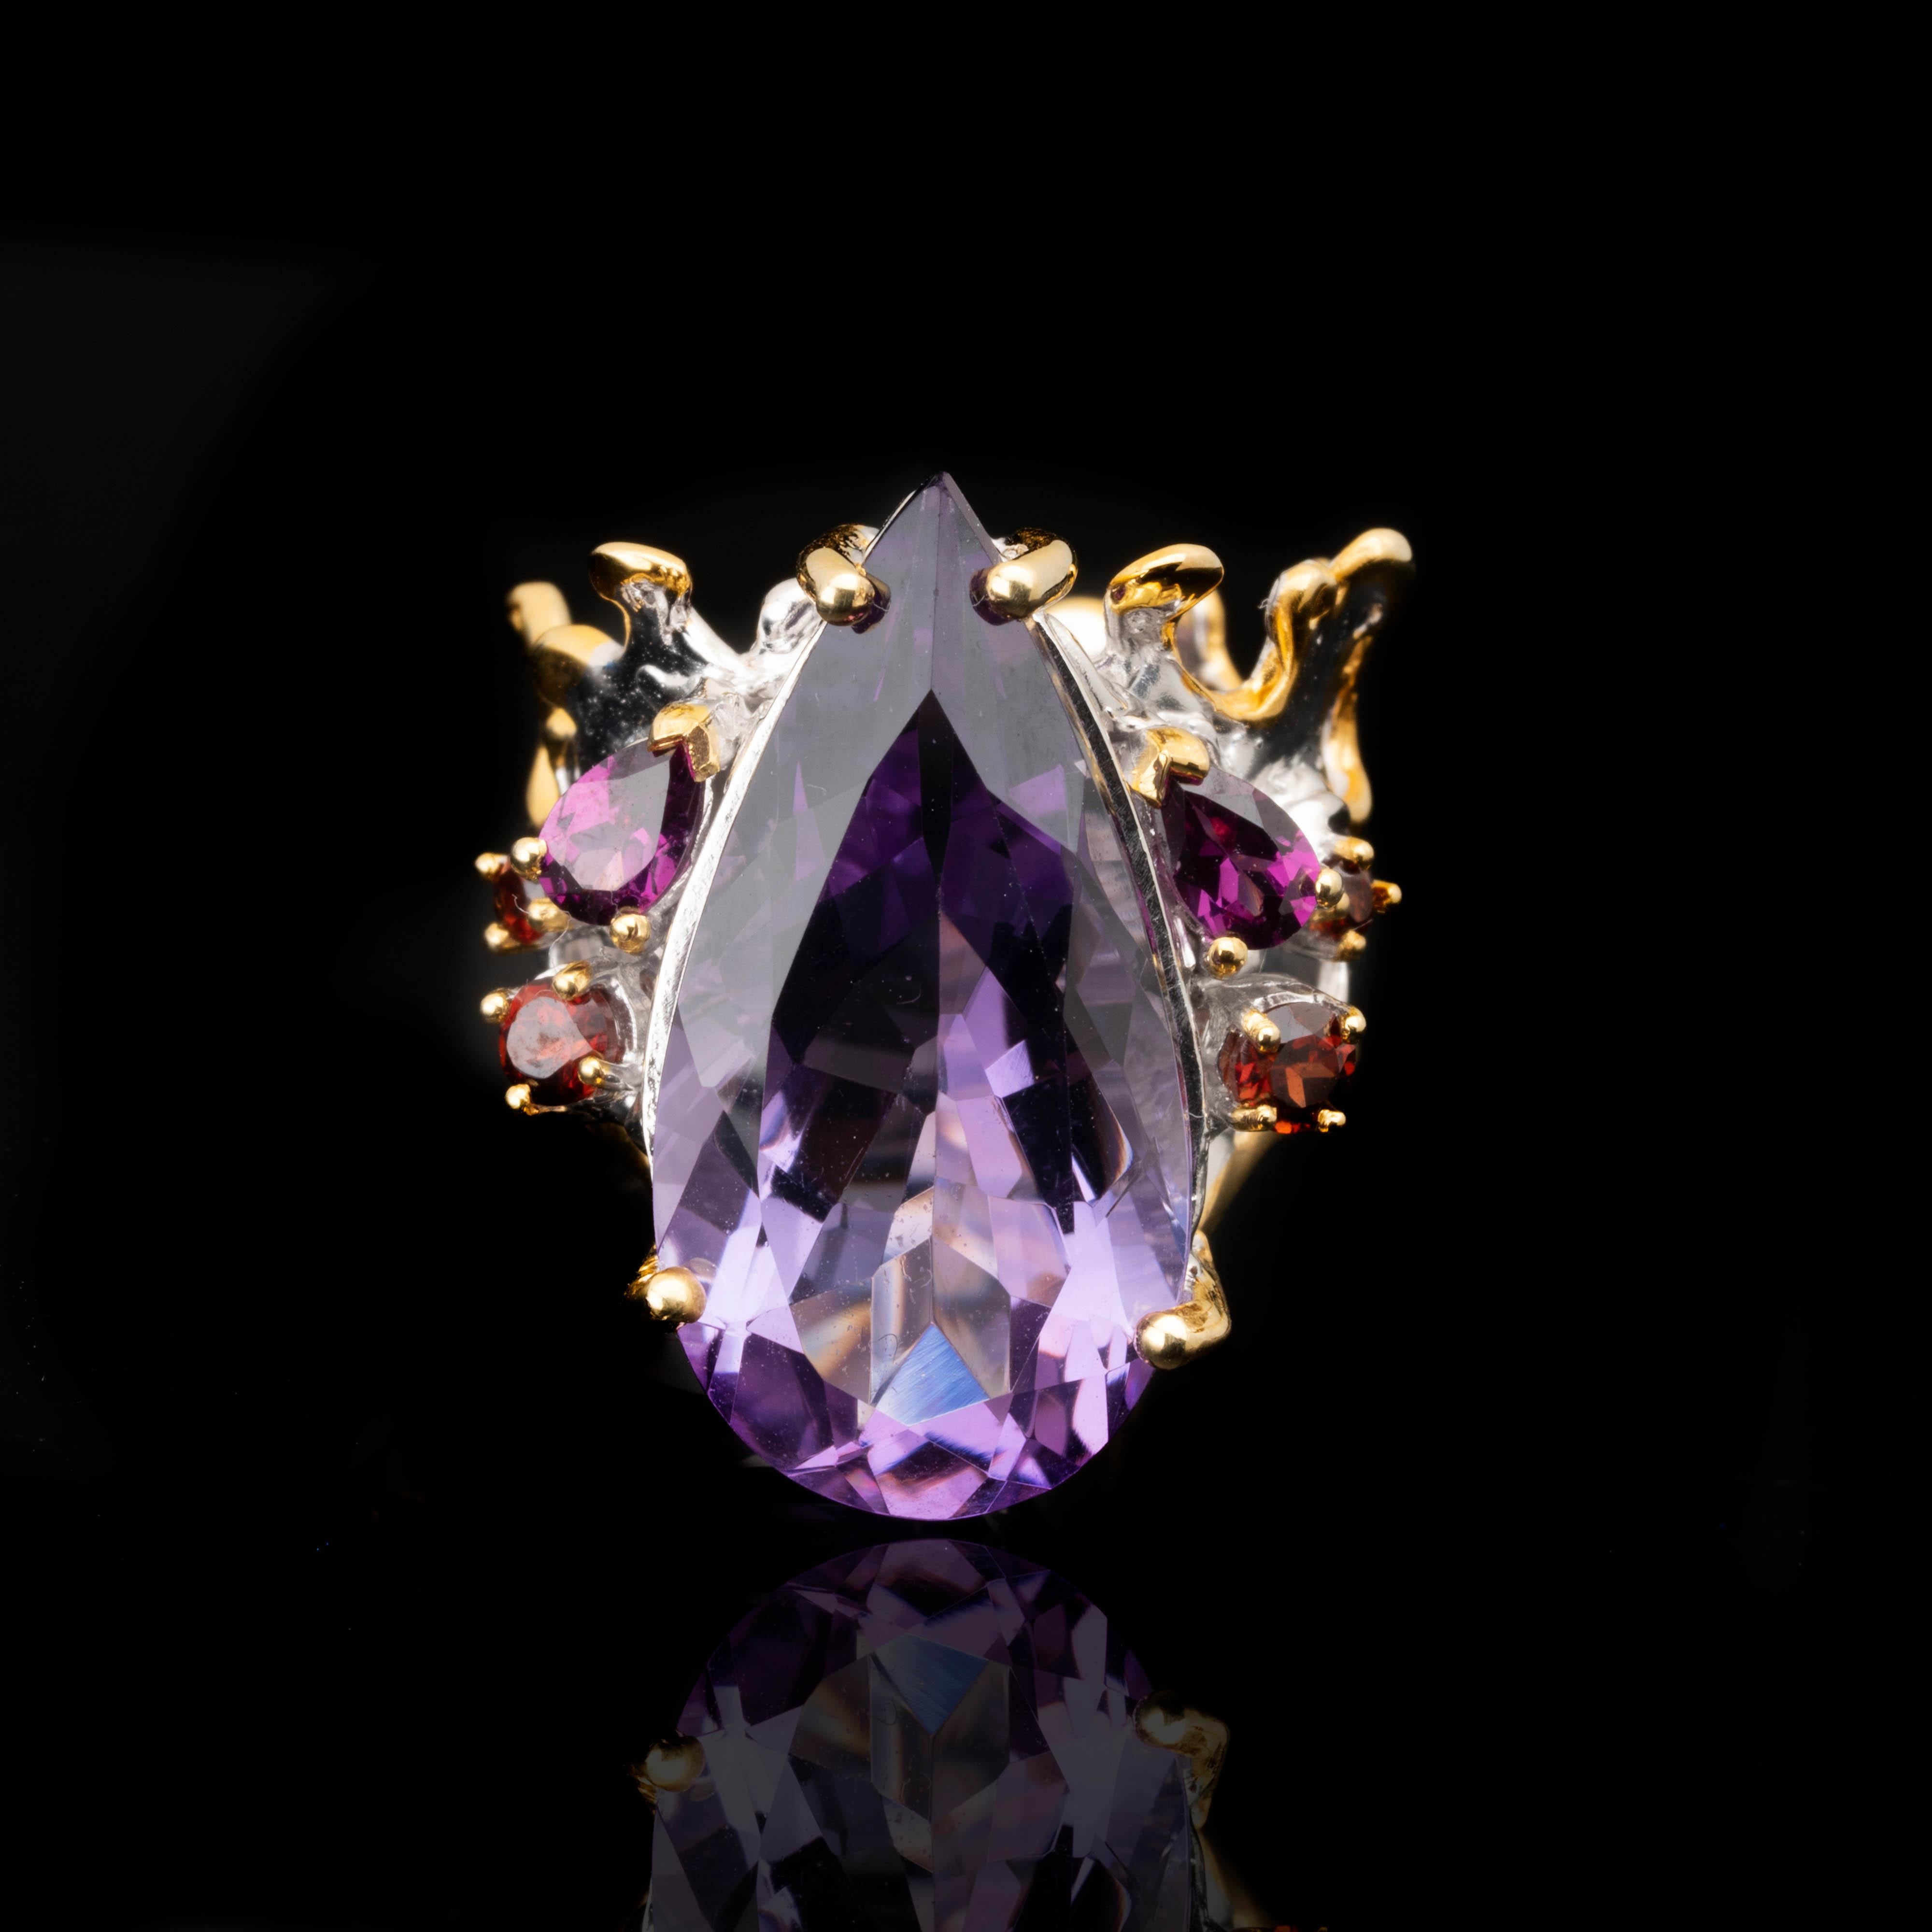 This royally decadent ring features a large, incredibly clear, sparkling teardrop amethyst adorned with rhodolites and garnets in a sterling silver setting with luxe 14k gold accents and crown-like detailing. An accessory fit for a